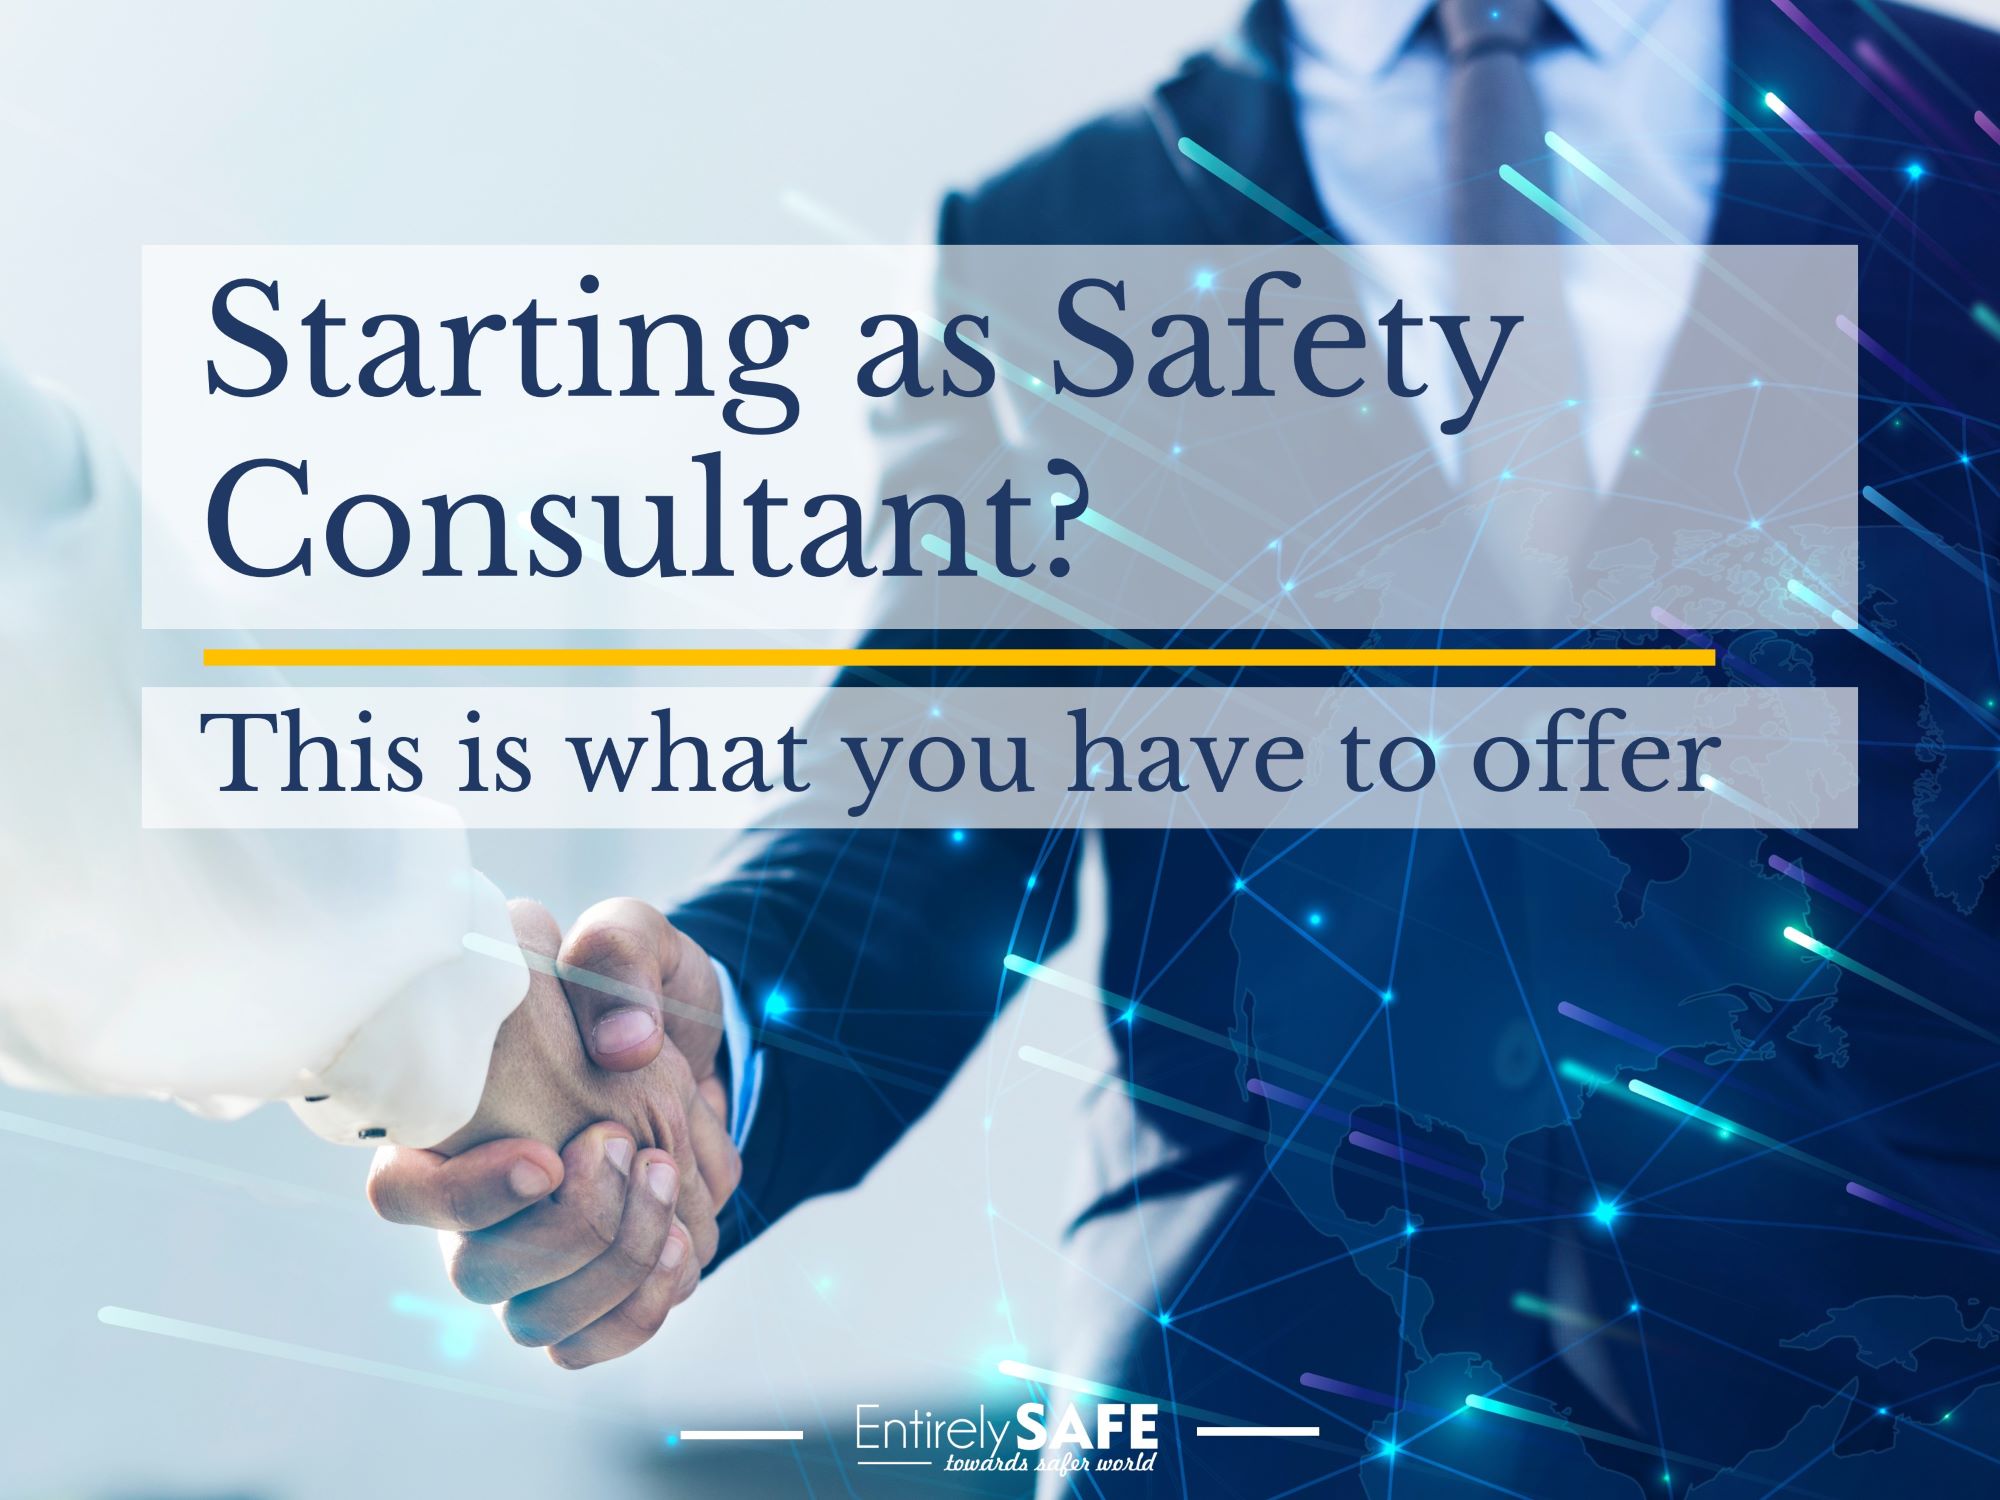 Need a side hustle? Services you can offer as a Safety Consultant